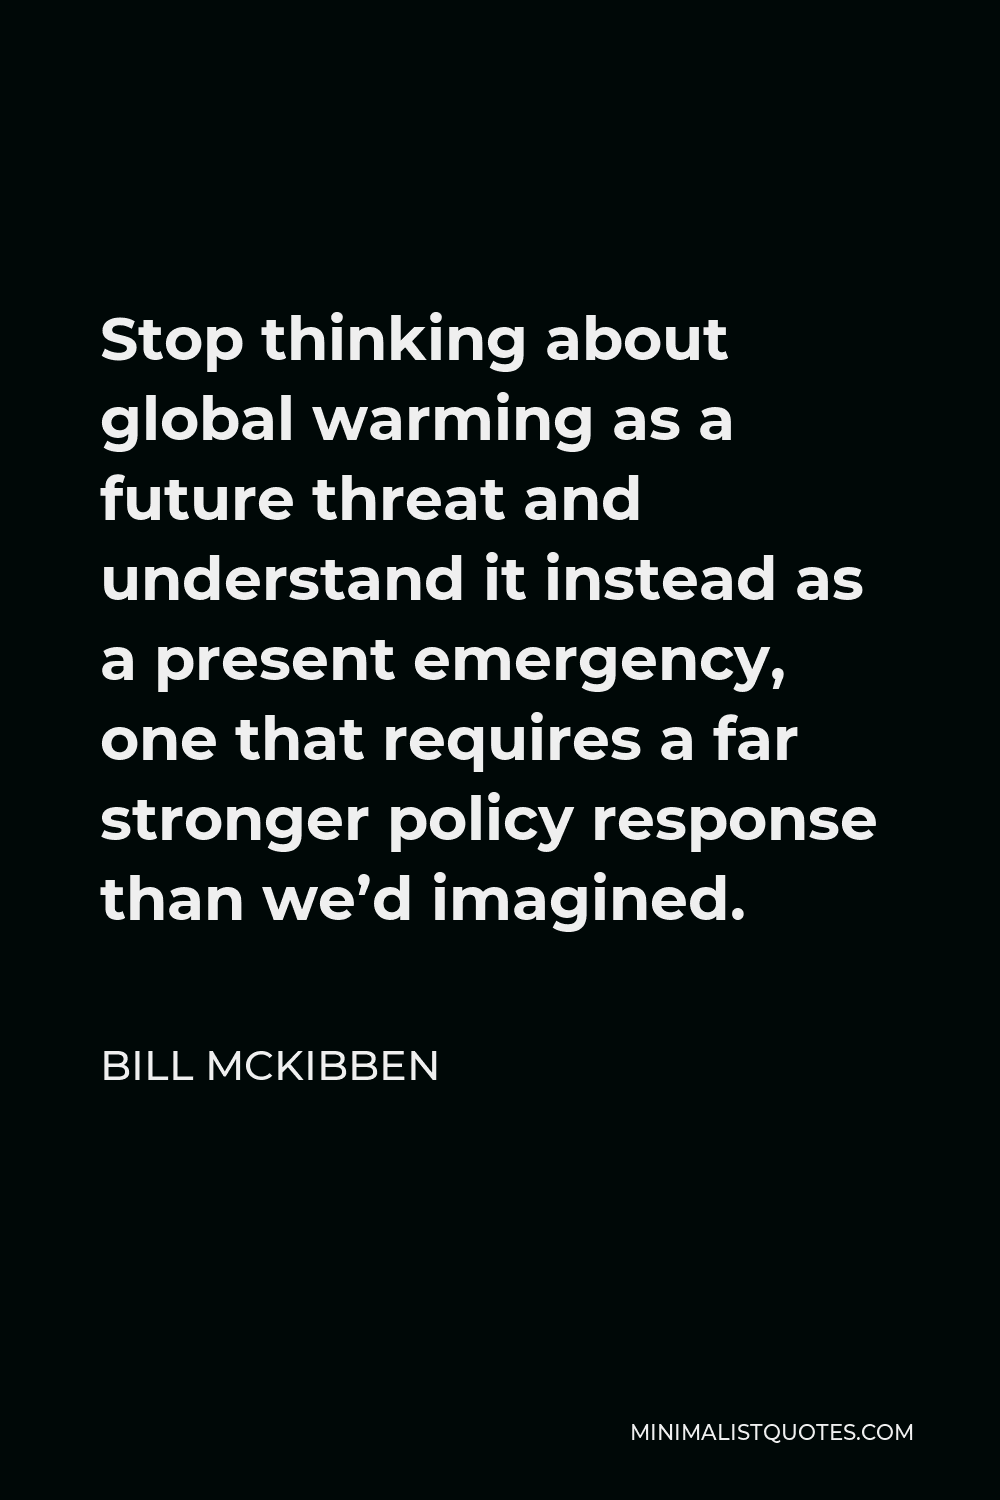 Bill McKibben Quote - Stop thinking about global warming as a future threat and understand it instead as a present emergency, one that requires a far stronger policy response than we’d imagined.